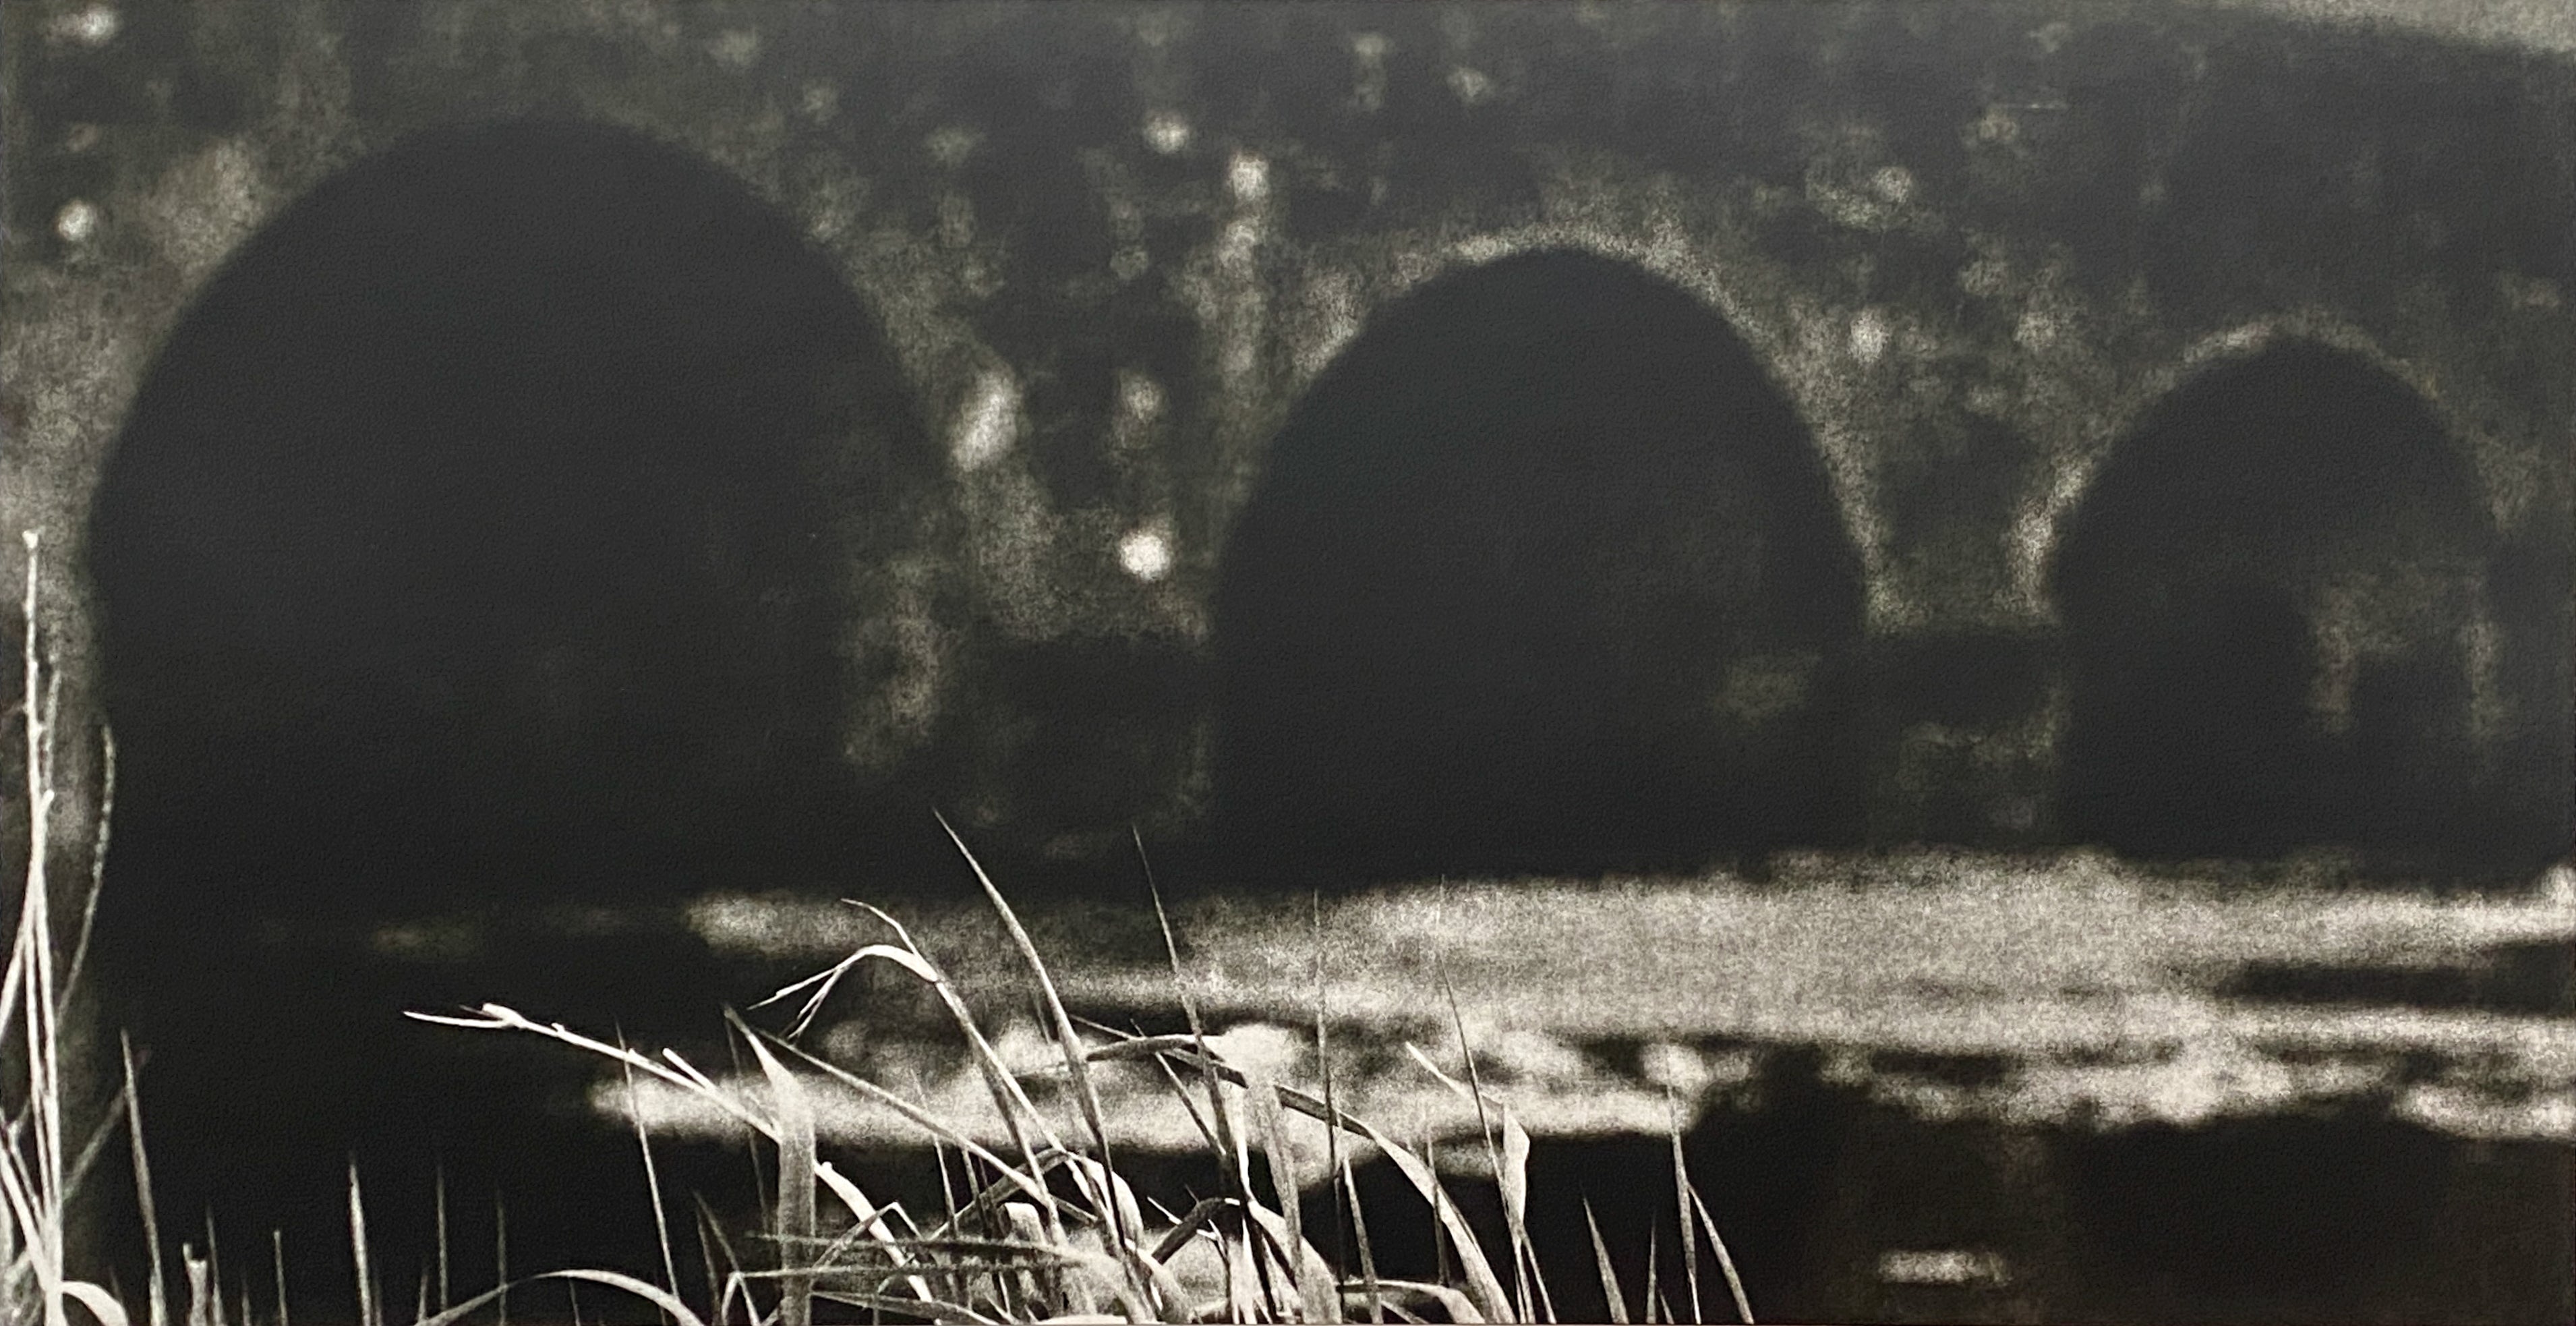 An old stone bridge in Ireland with water flowing and grasses on the side of the bank. The image is dark and moody, a silver gelatin print made using a paper negative, which makes the image very suggestive and emotive.